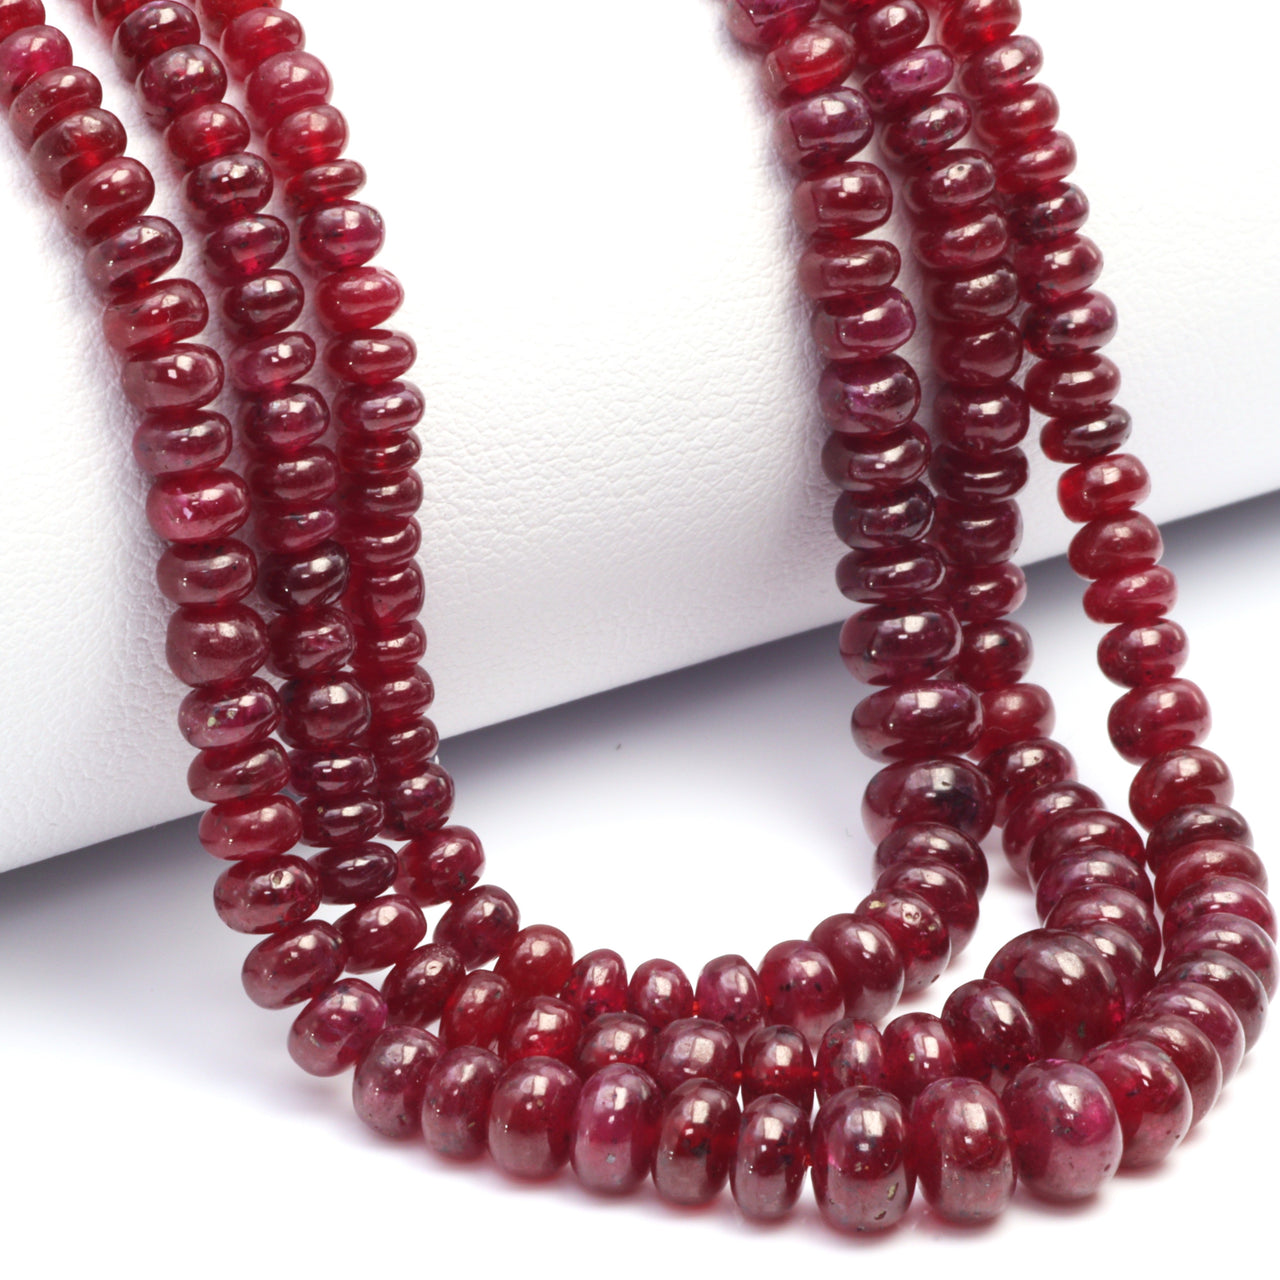 Red Ruby 3mm Smooth Rondelles